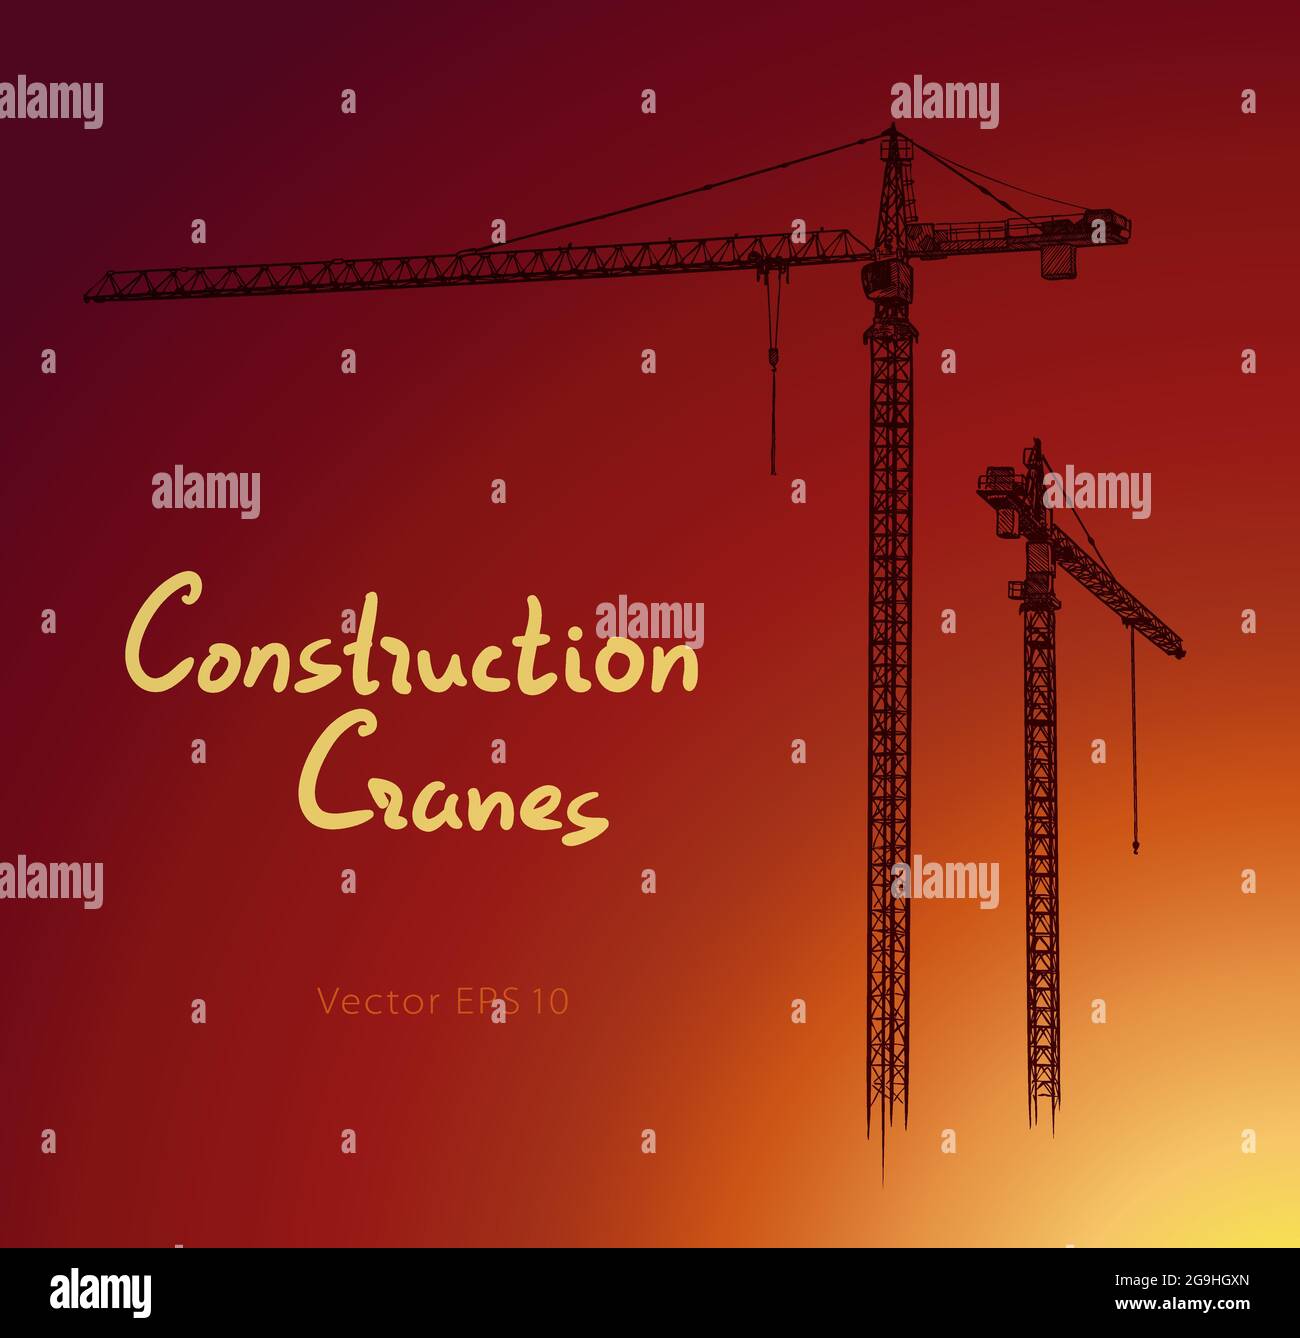 Tower construction cranes. Hand drawn vector illustration isolated on white background. Stock Vector